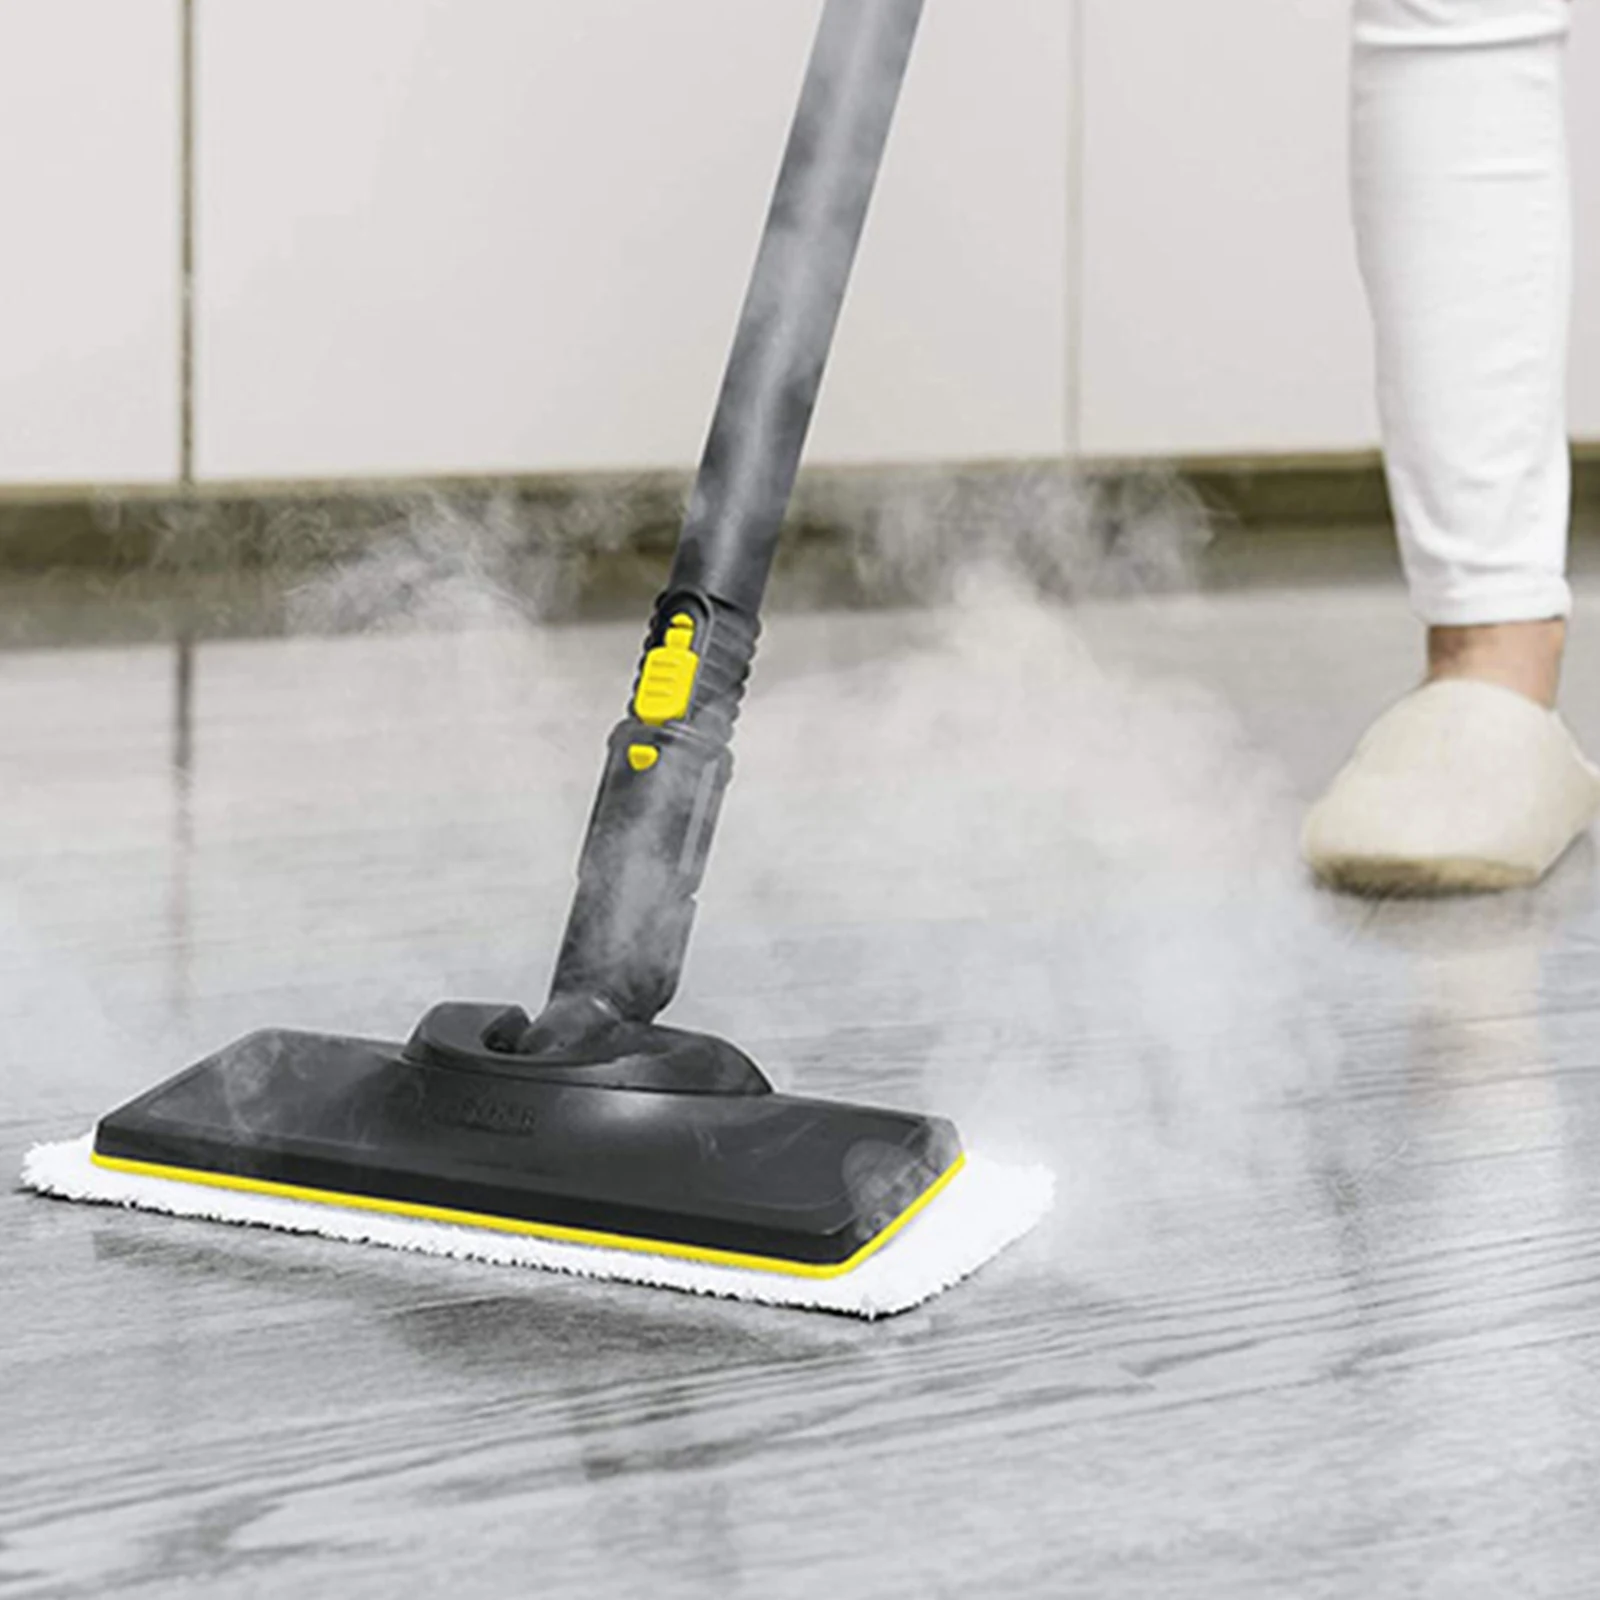 Details about   For Karcher SC1/SC2/SC3/SC4/SC5/SV7 Sweeping Steam Mop Cloth Cleaning Pads 